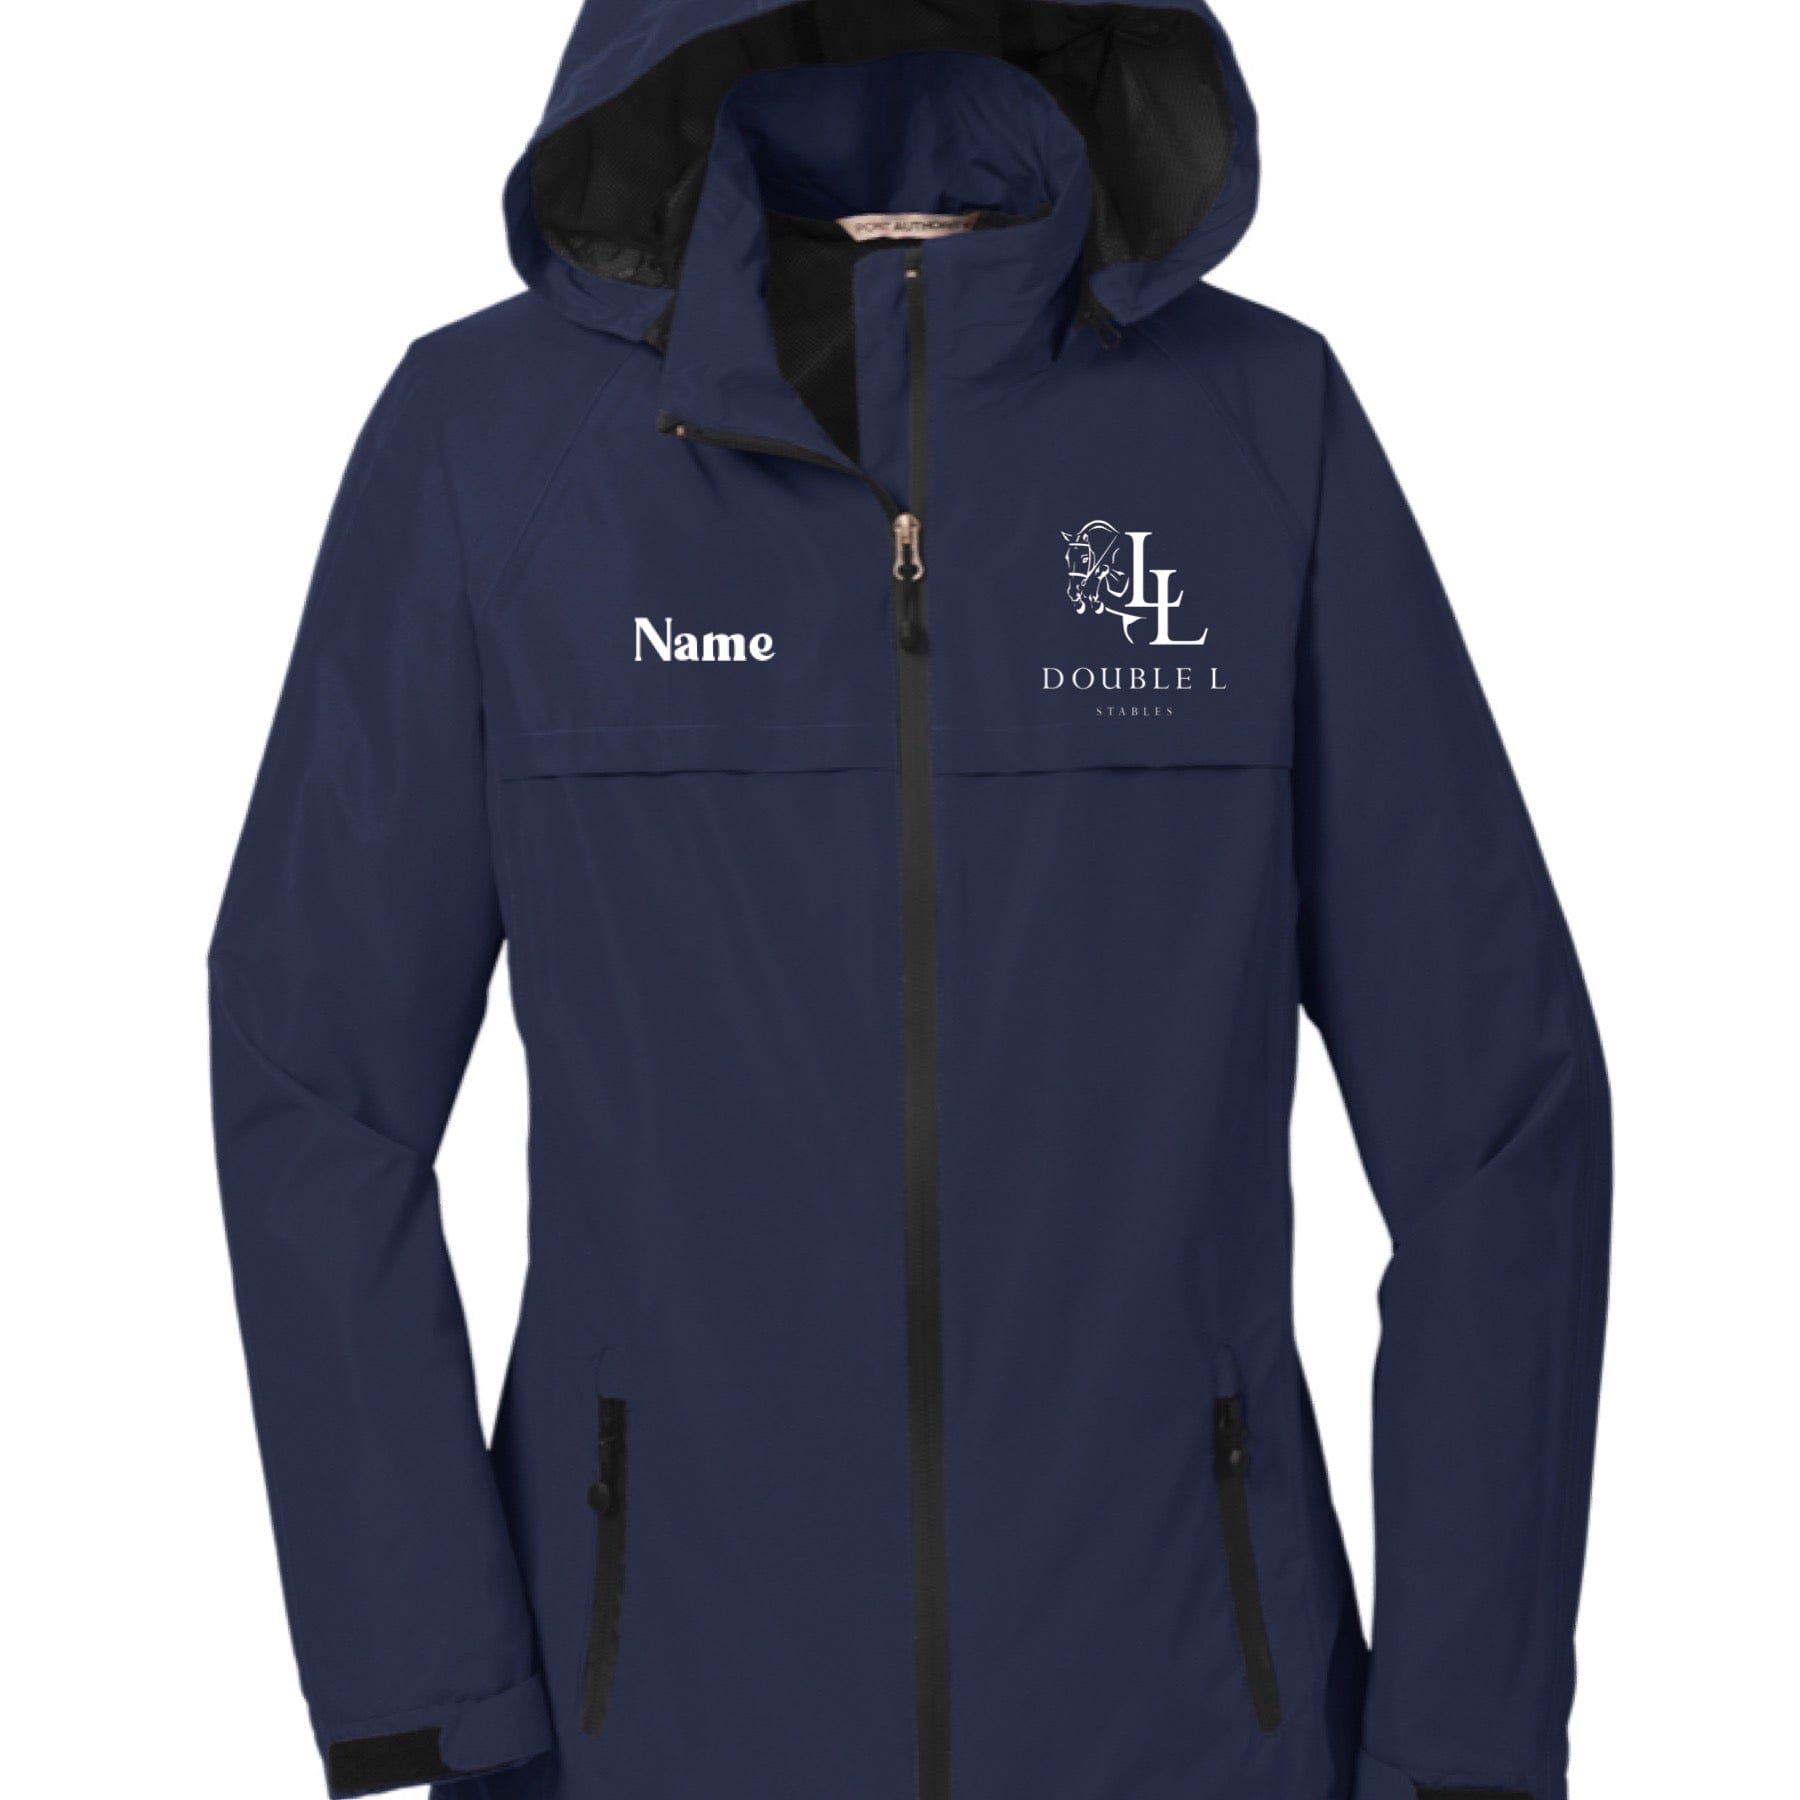 Equestrian Team Apparel Double L Stables Raincoat equestrian team apparel online tack store mobile tack store custom farm apparel custom show stable clothing equestrian lifestyle horse show clothing riding clothes horses equestrian tack store